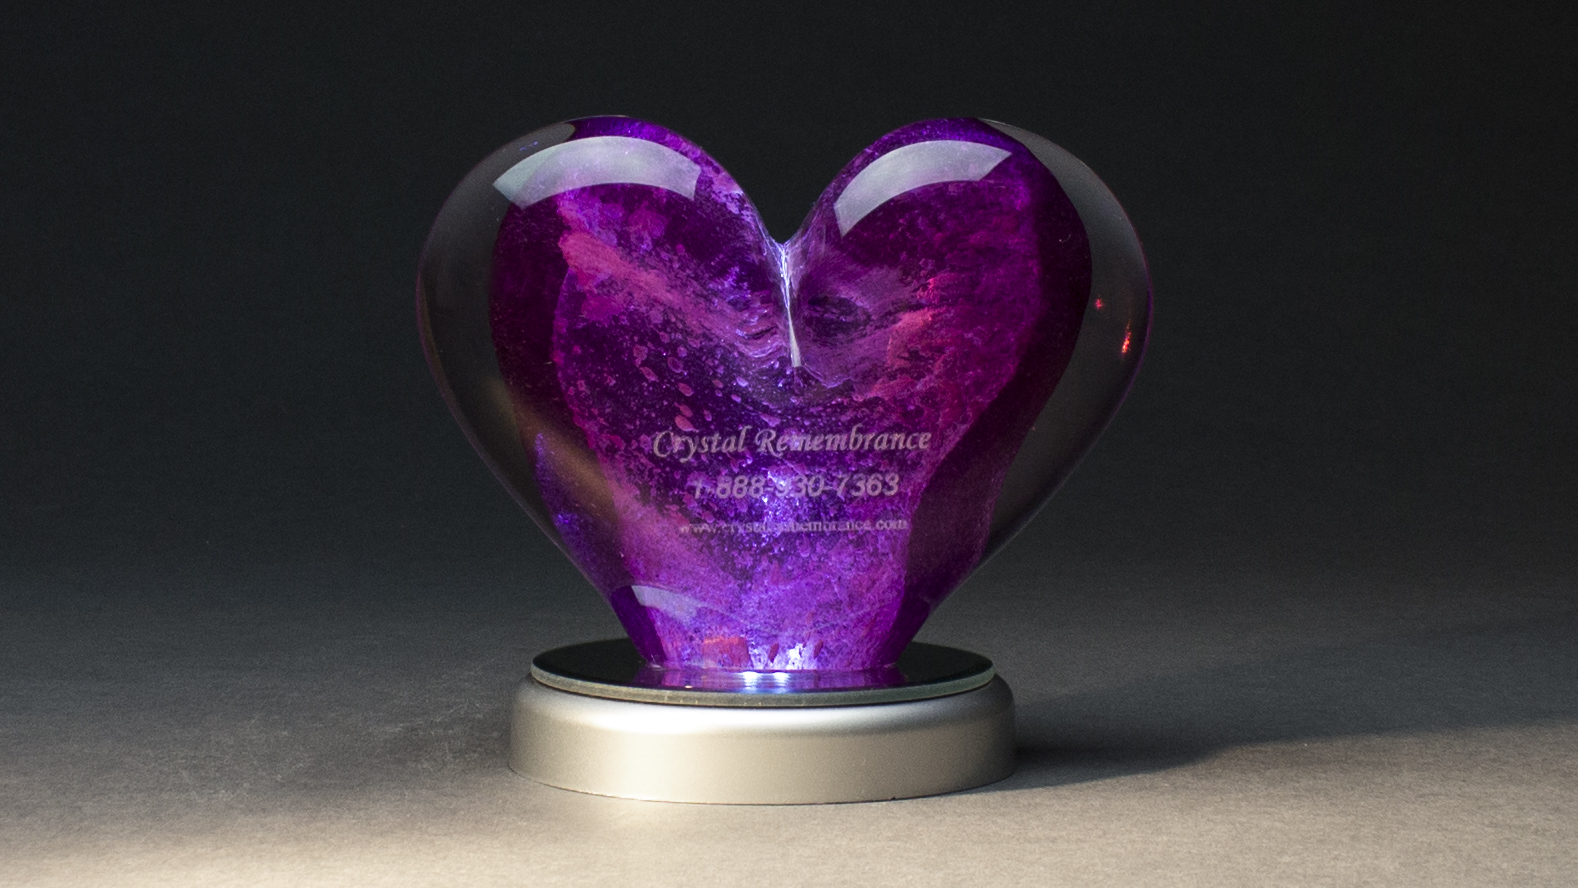 Crystal Remembrance dog memorial glass pieces